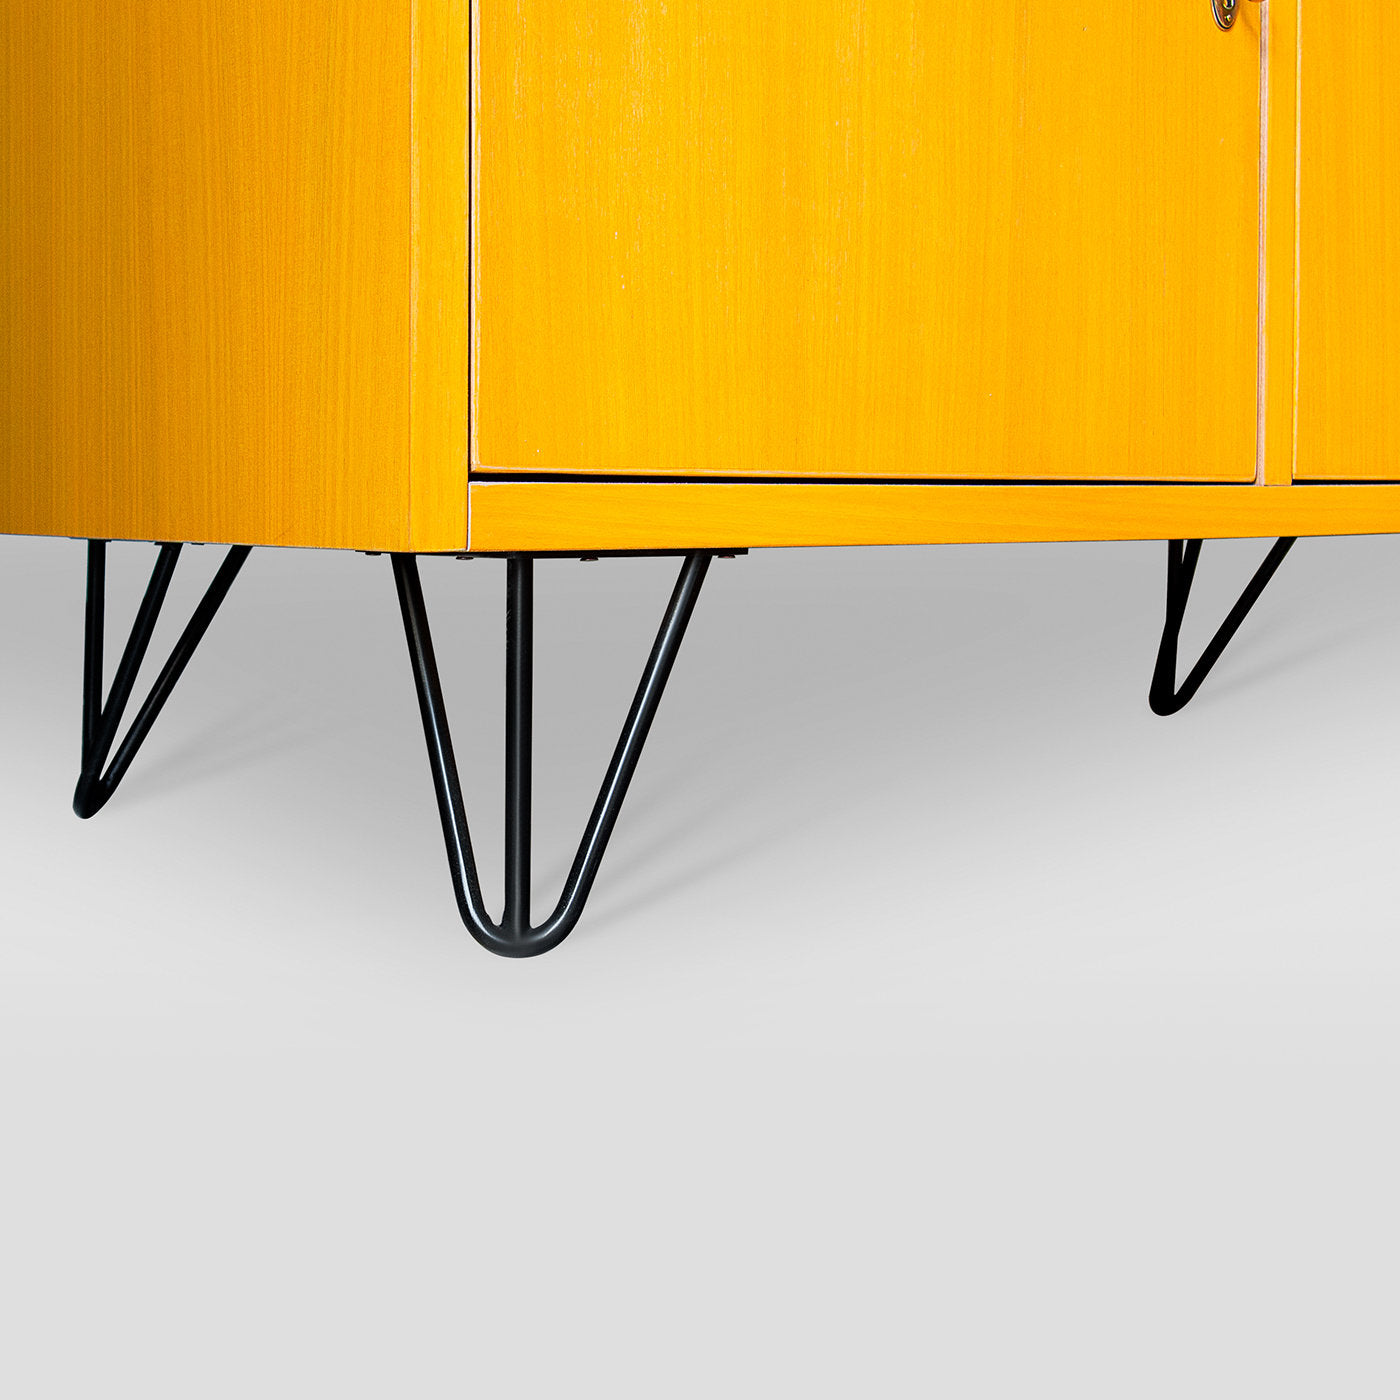 50s-style Yellow Cabinet - Alternative view 1